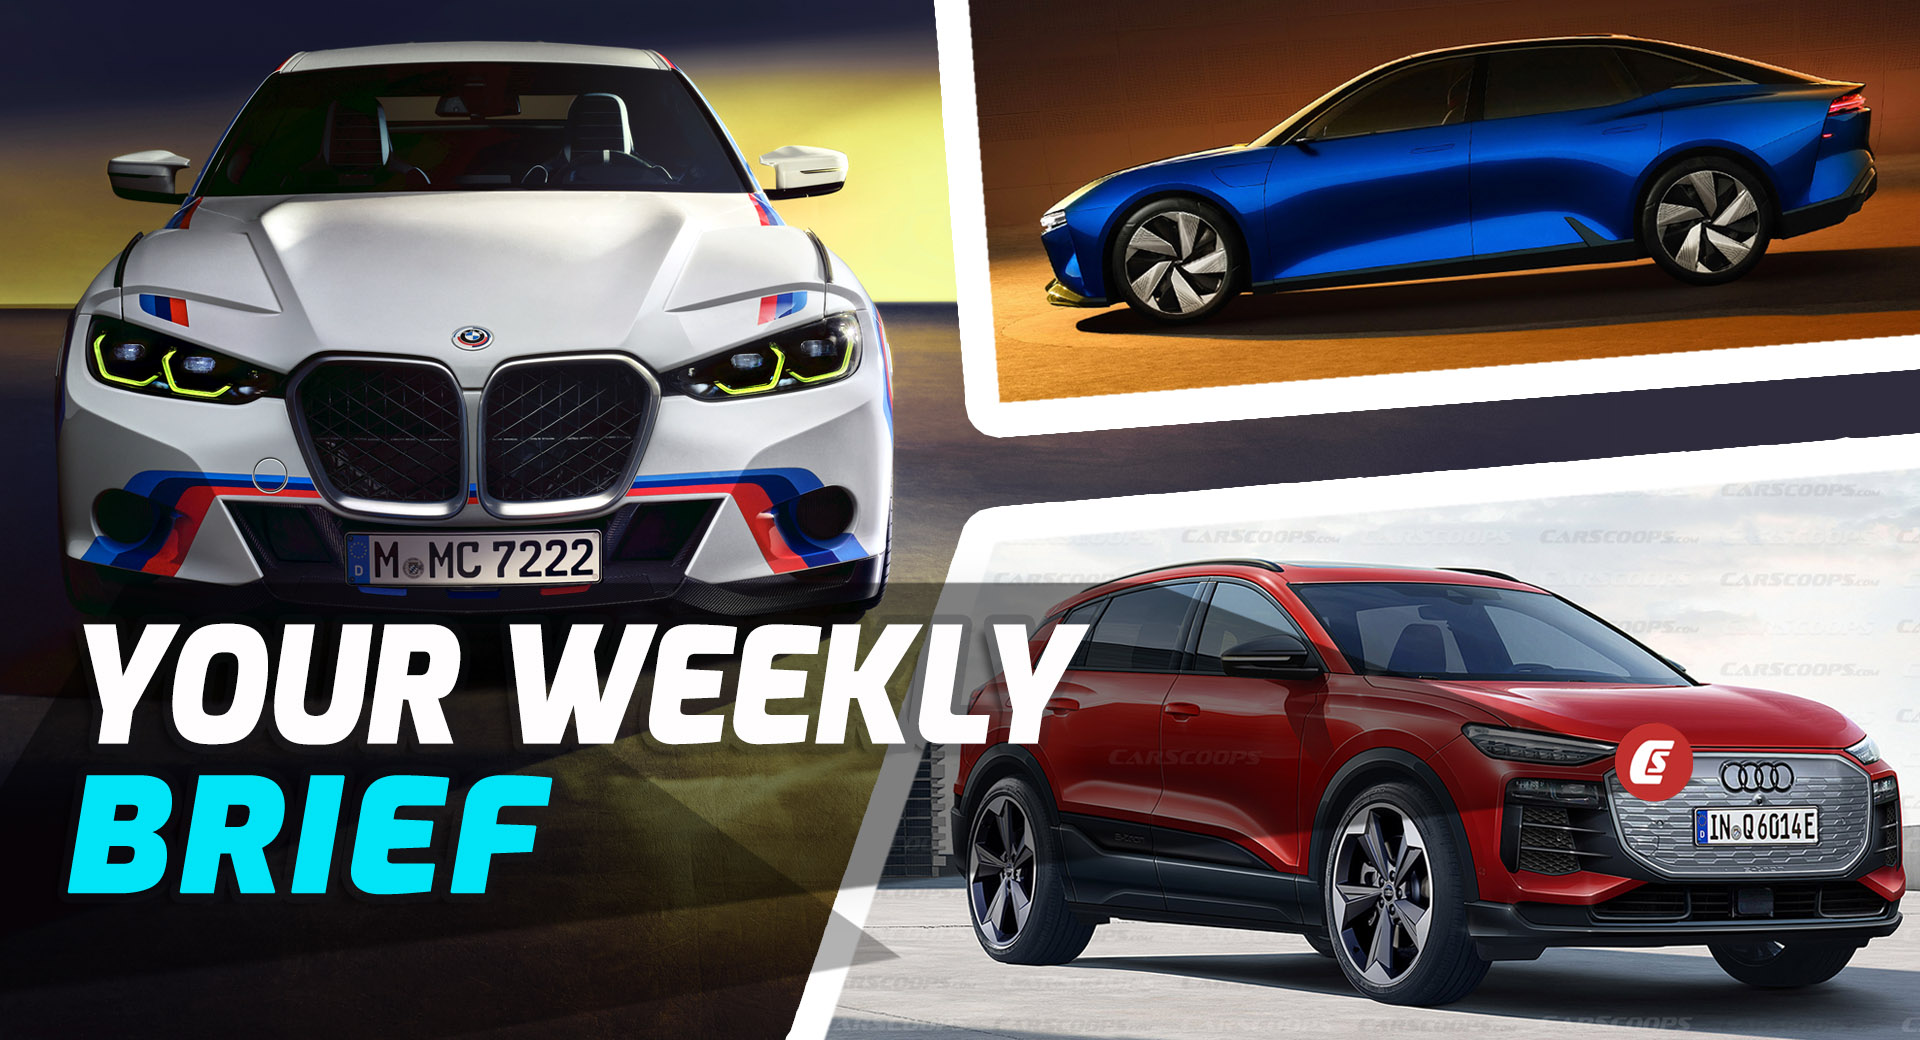 New BMW 3.0 CSL, Audi Q6 E-Tron Render, And Chevrolet FNR-XE Concept: Your Weekly Brief